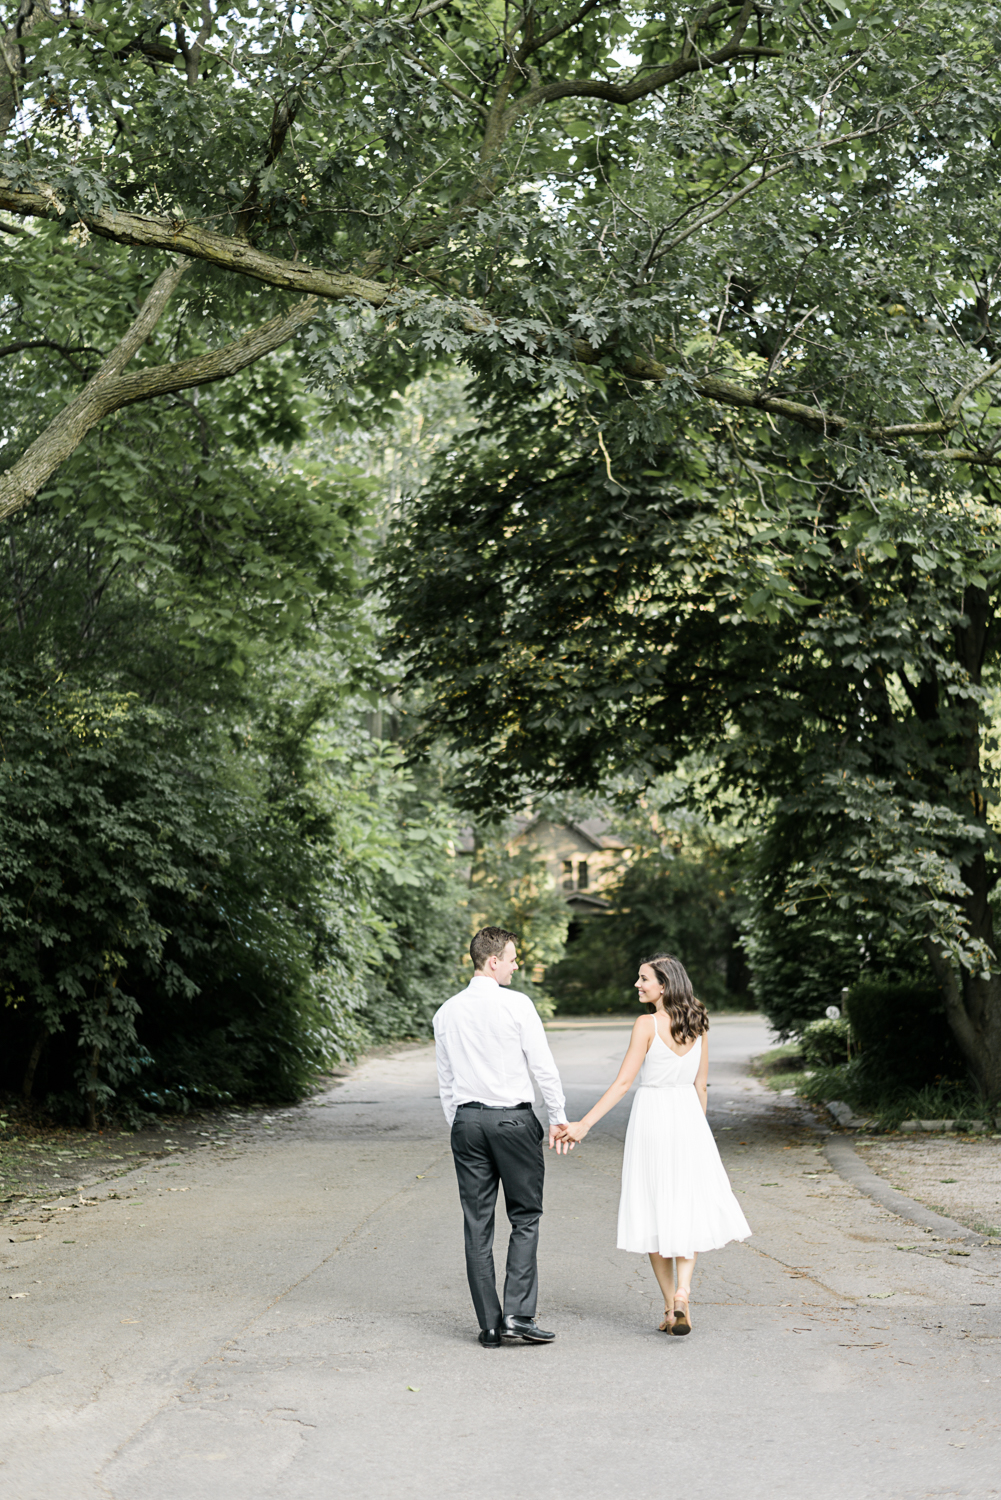 Couple walking down the streets on Wychwood park